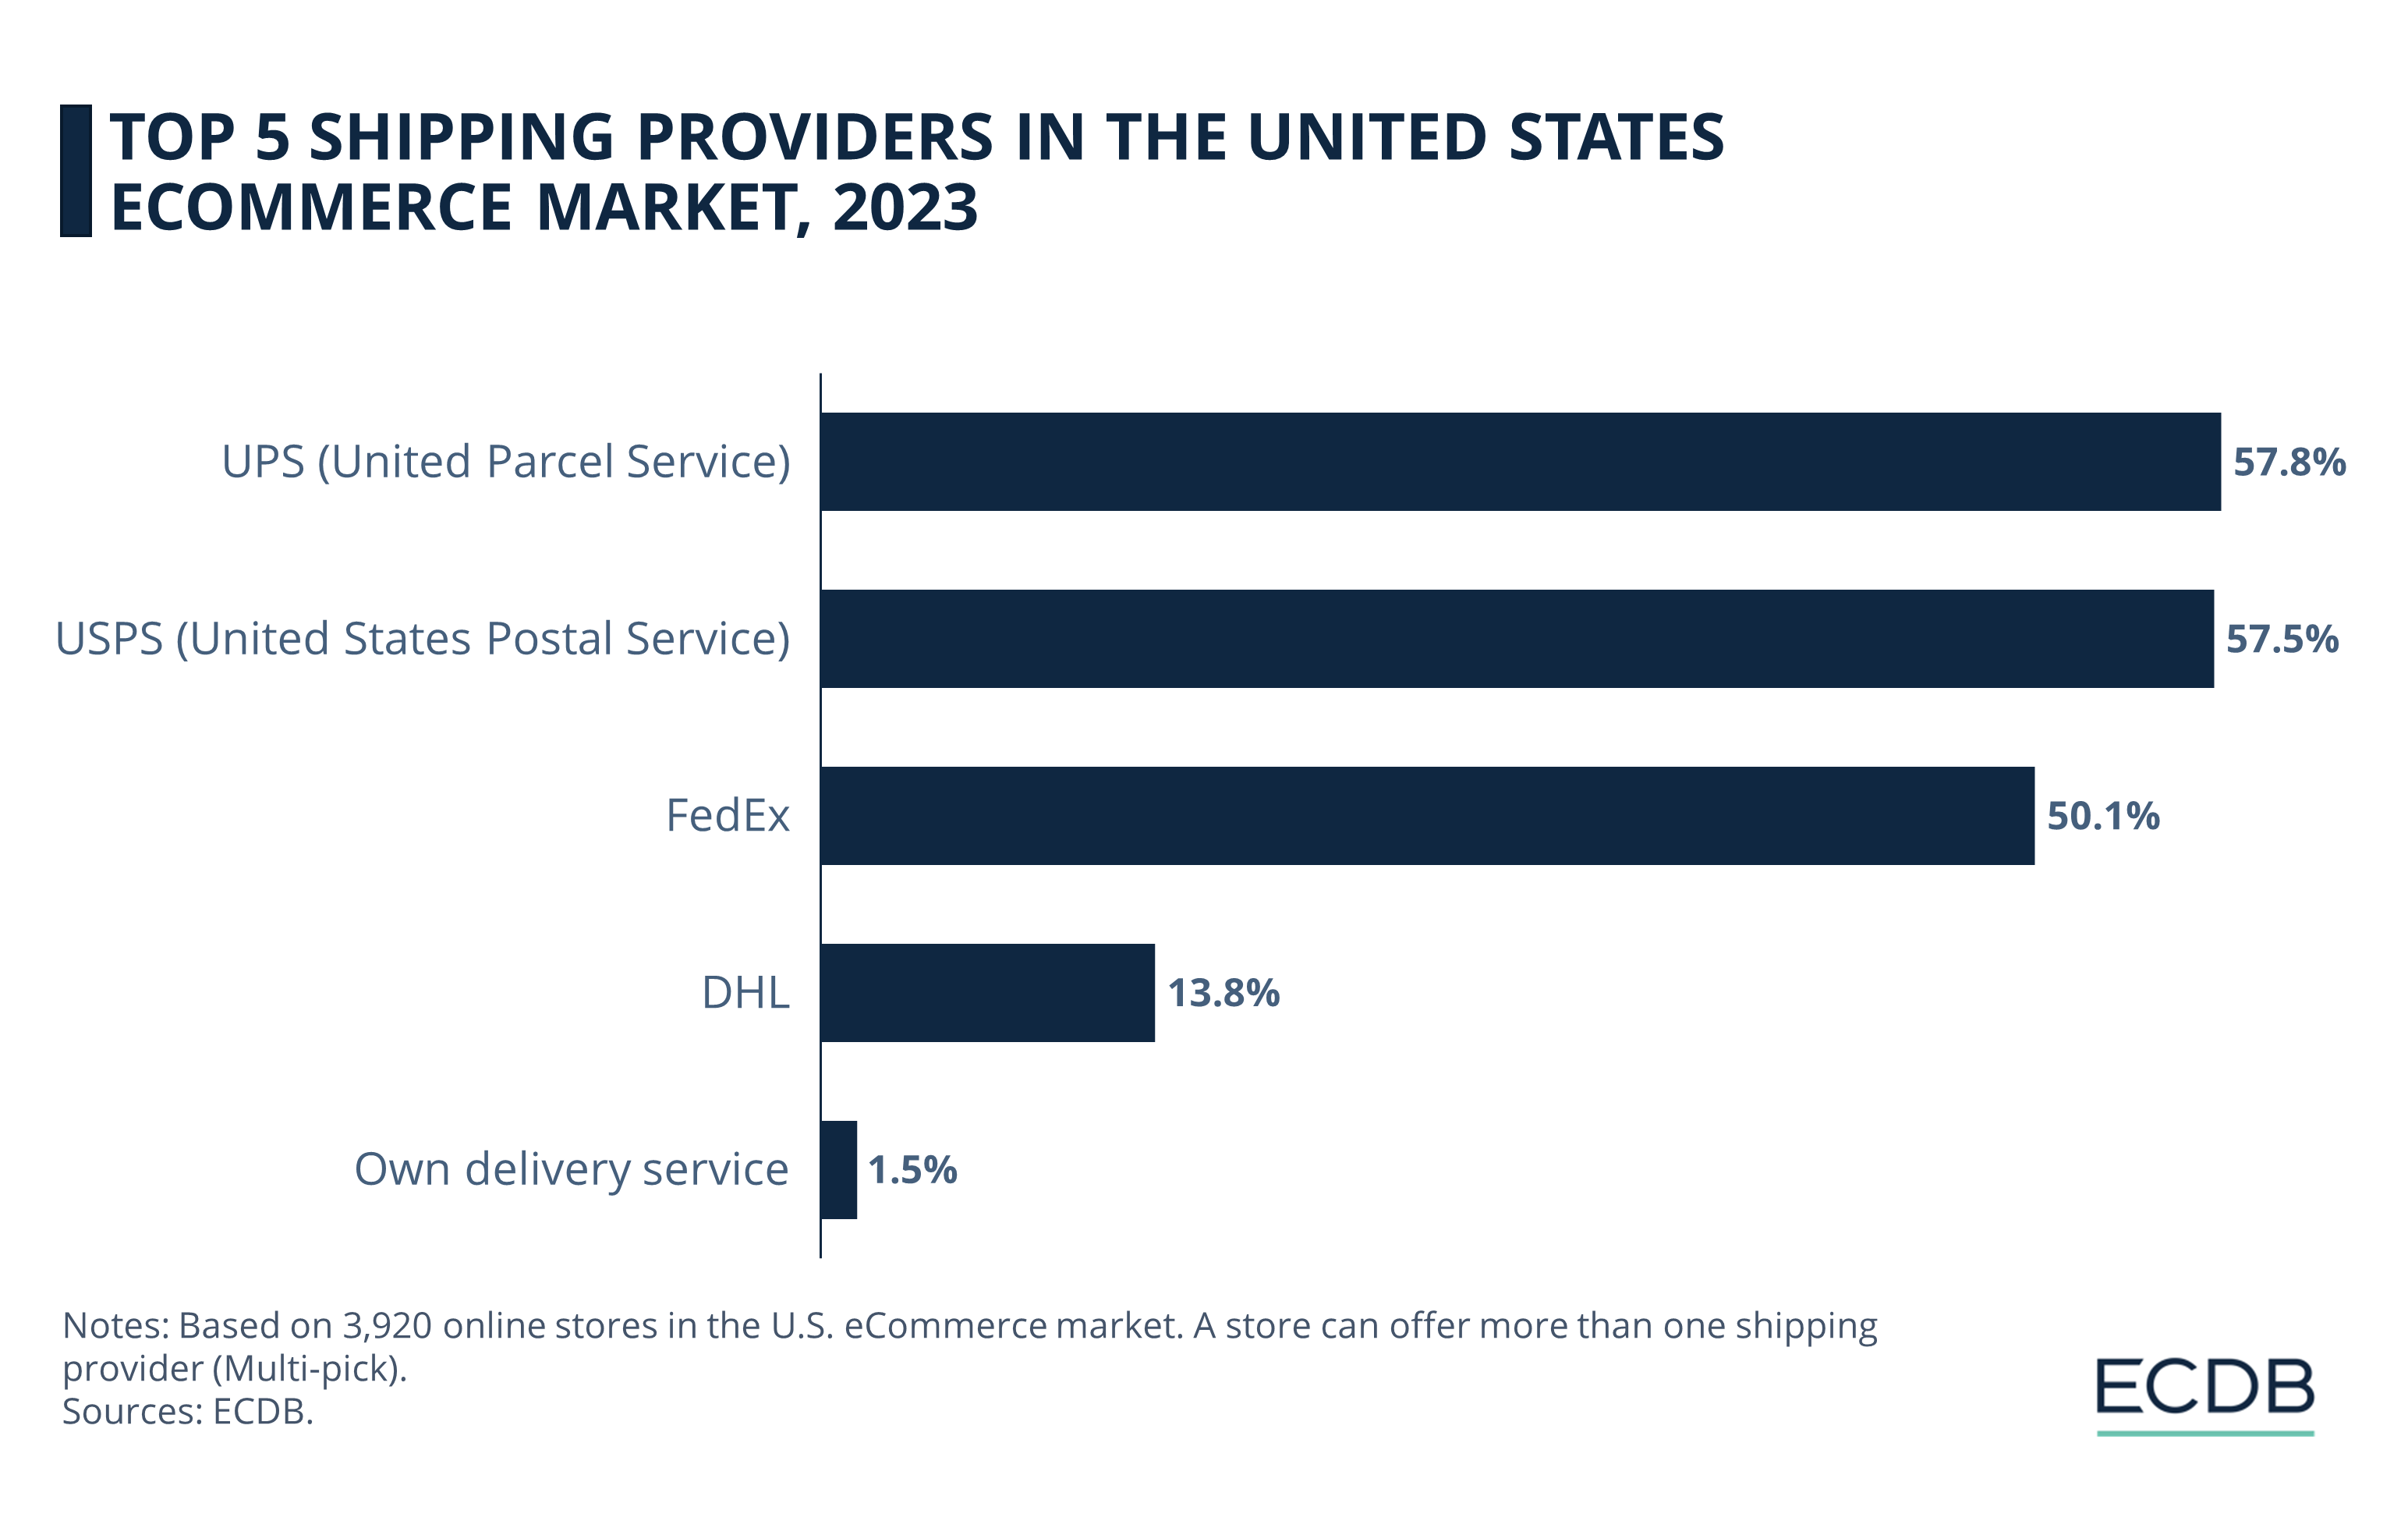 Top 5 Shipping Providers in the United States eCommerce Market, 2023